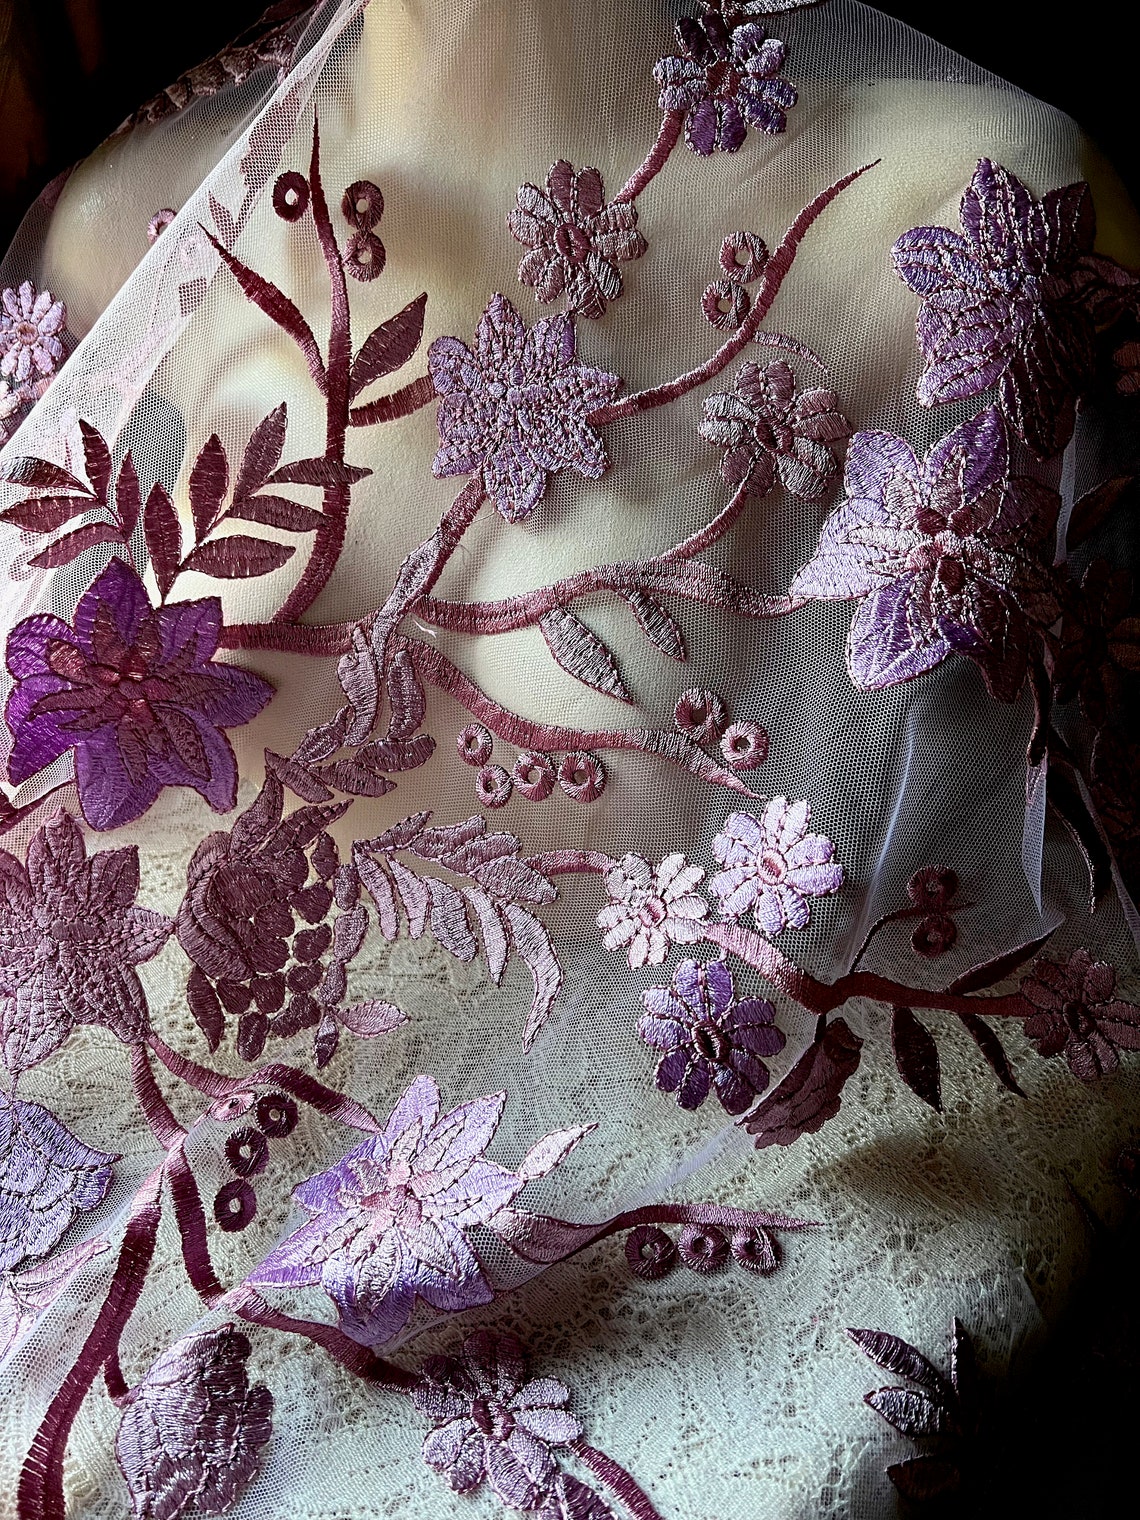 Purples Embroidered Lace Fabric for Garments Gowns Costumes - Etsy